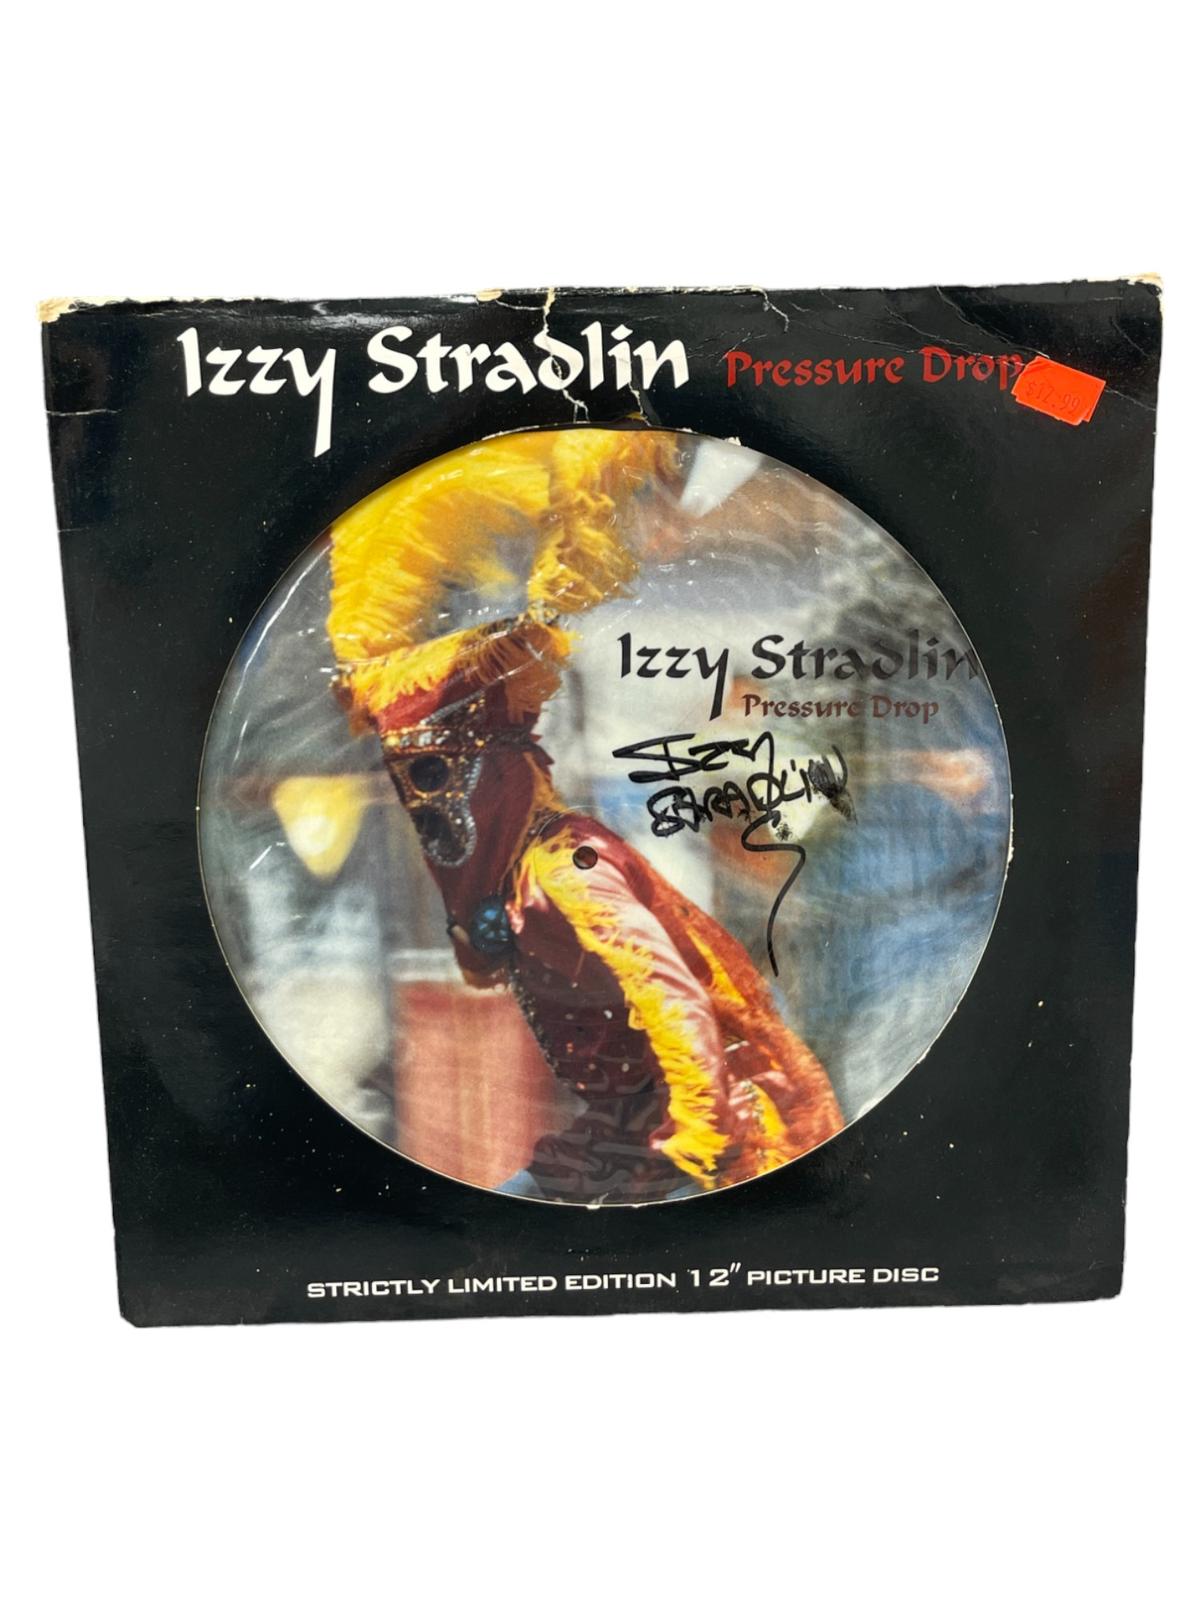 IZZY STRADLIN SIGNED AUTOGRAPH VINYL PICTURE DISC RECORD GUNS N ROSES